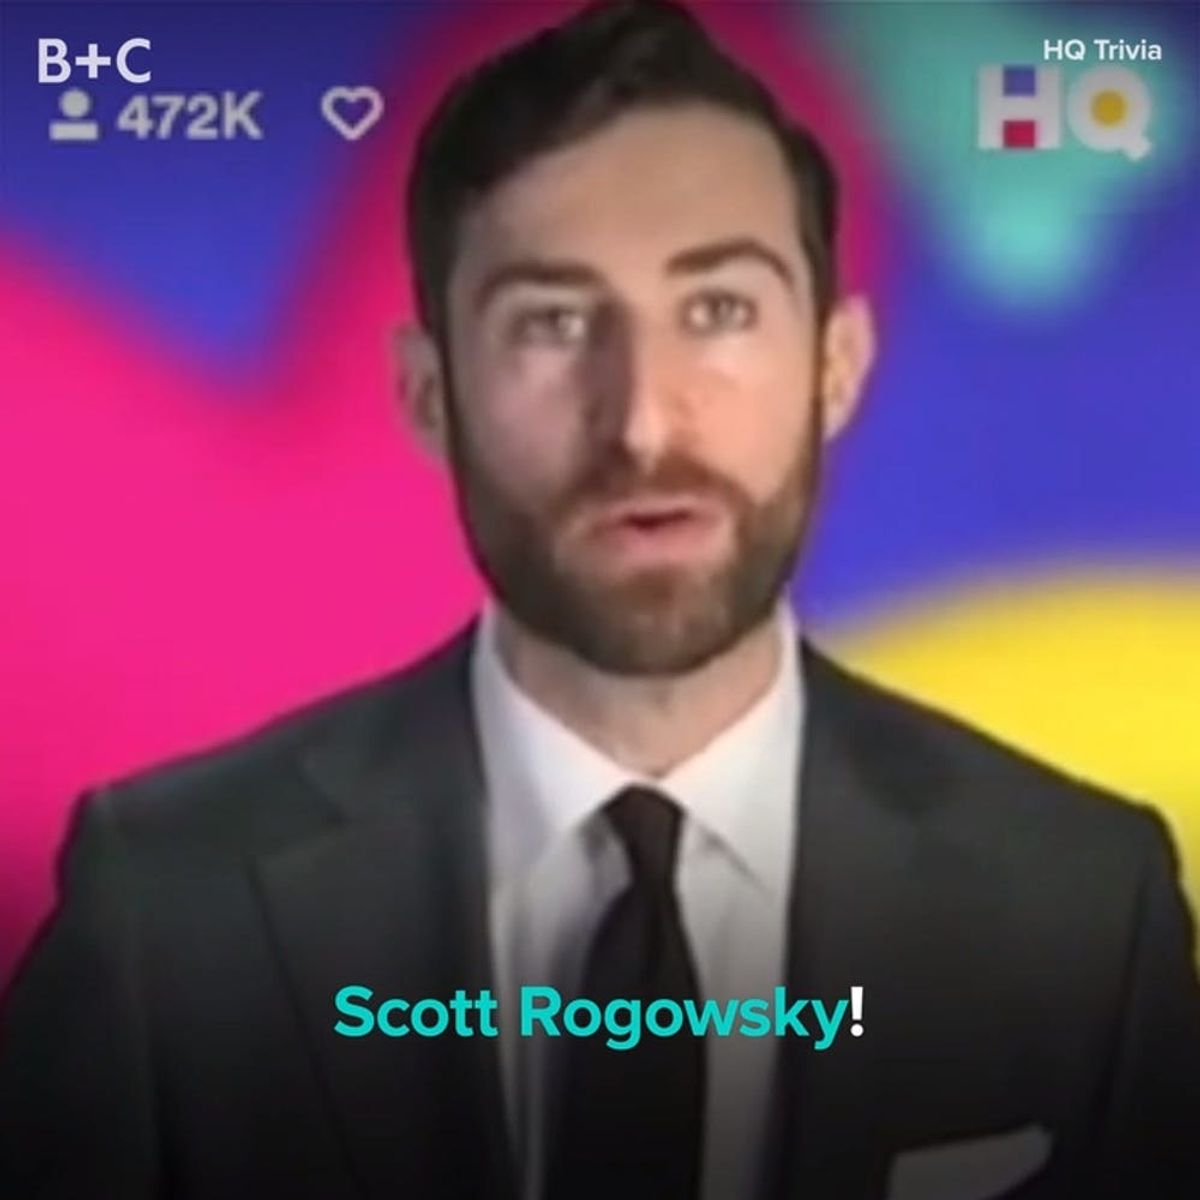 Everything You Need To Know About HQ Trivia’s Scott Rogowsky